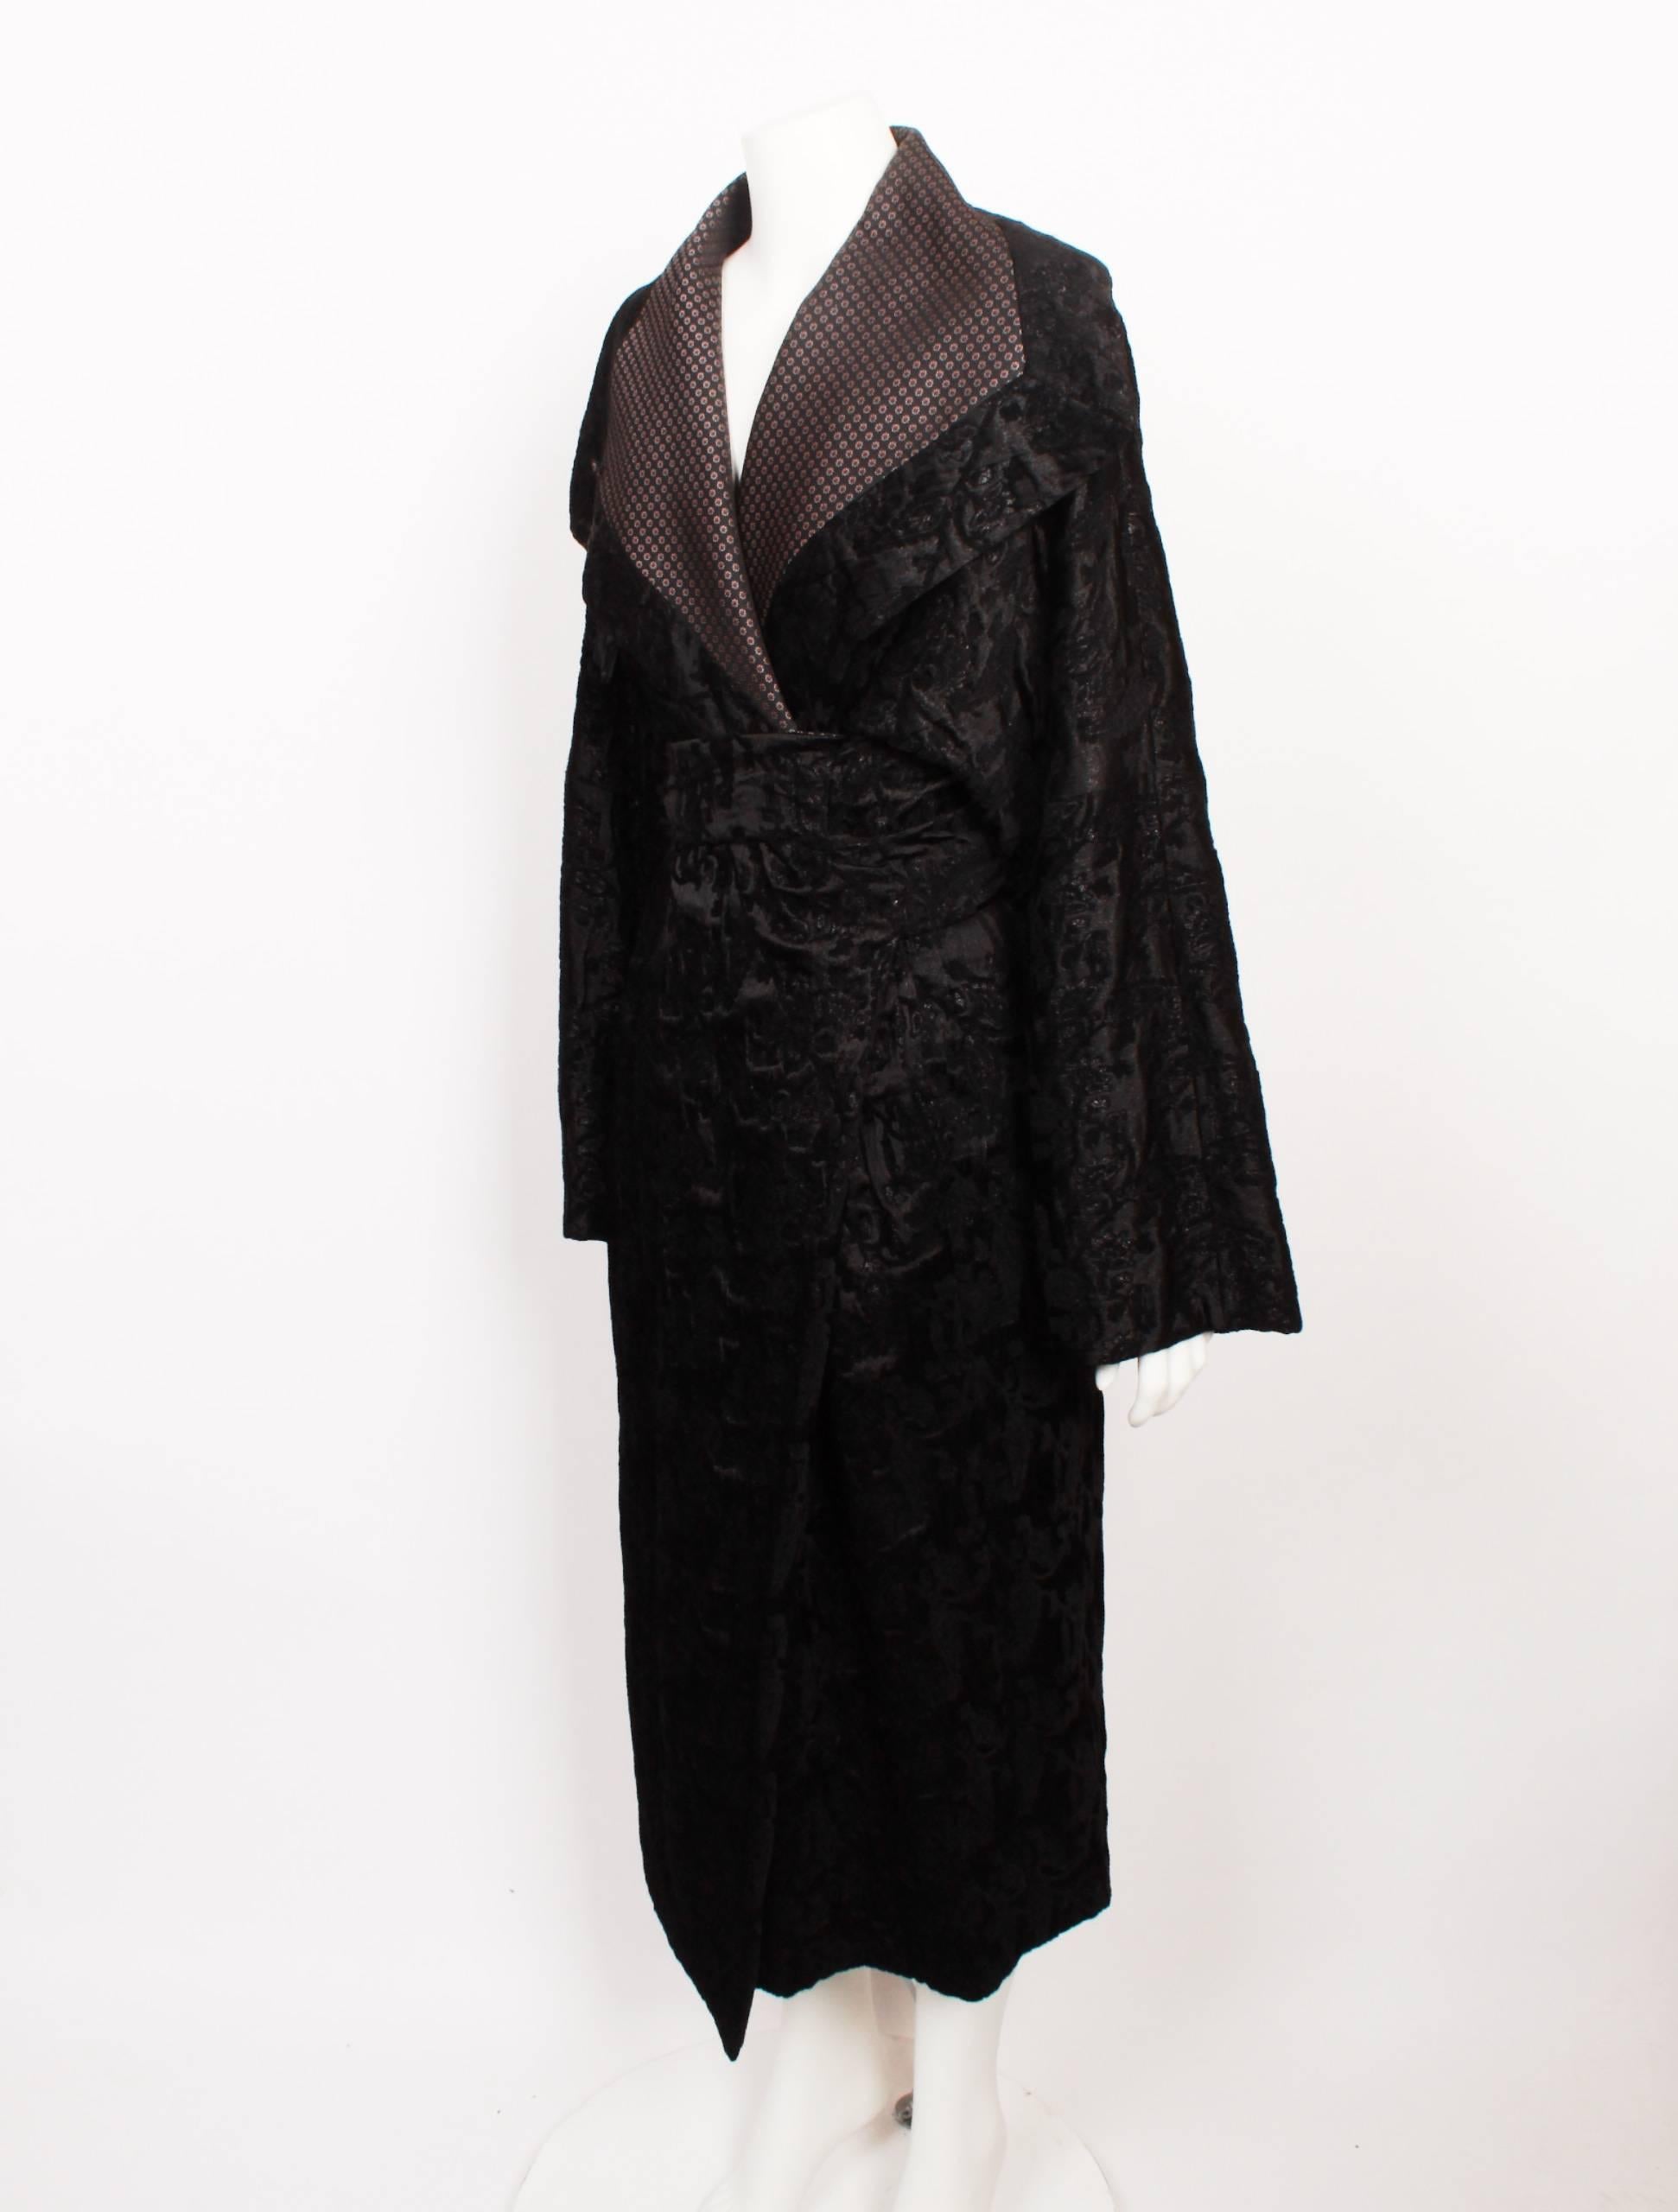 Black Brocade Coat. 

Antonio Marras made his first step into fashion in 1987, with his debut couture collection in 1996. His designs showcase his passion for handmade embellishment, rich colours and flamboyant decoration that stem from his